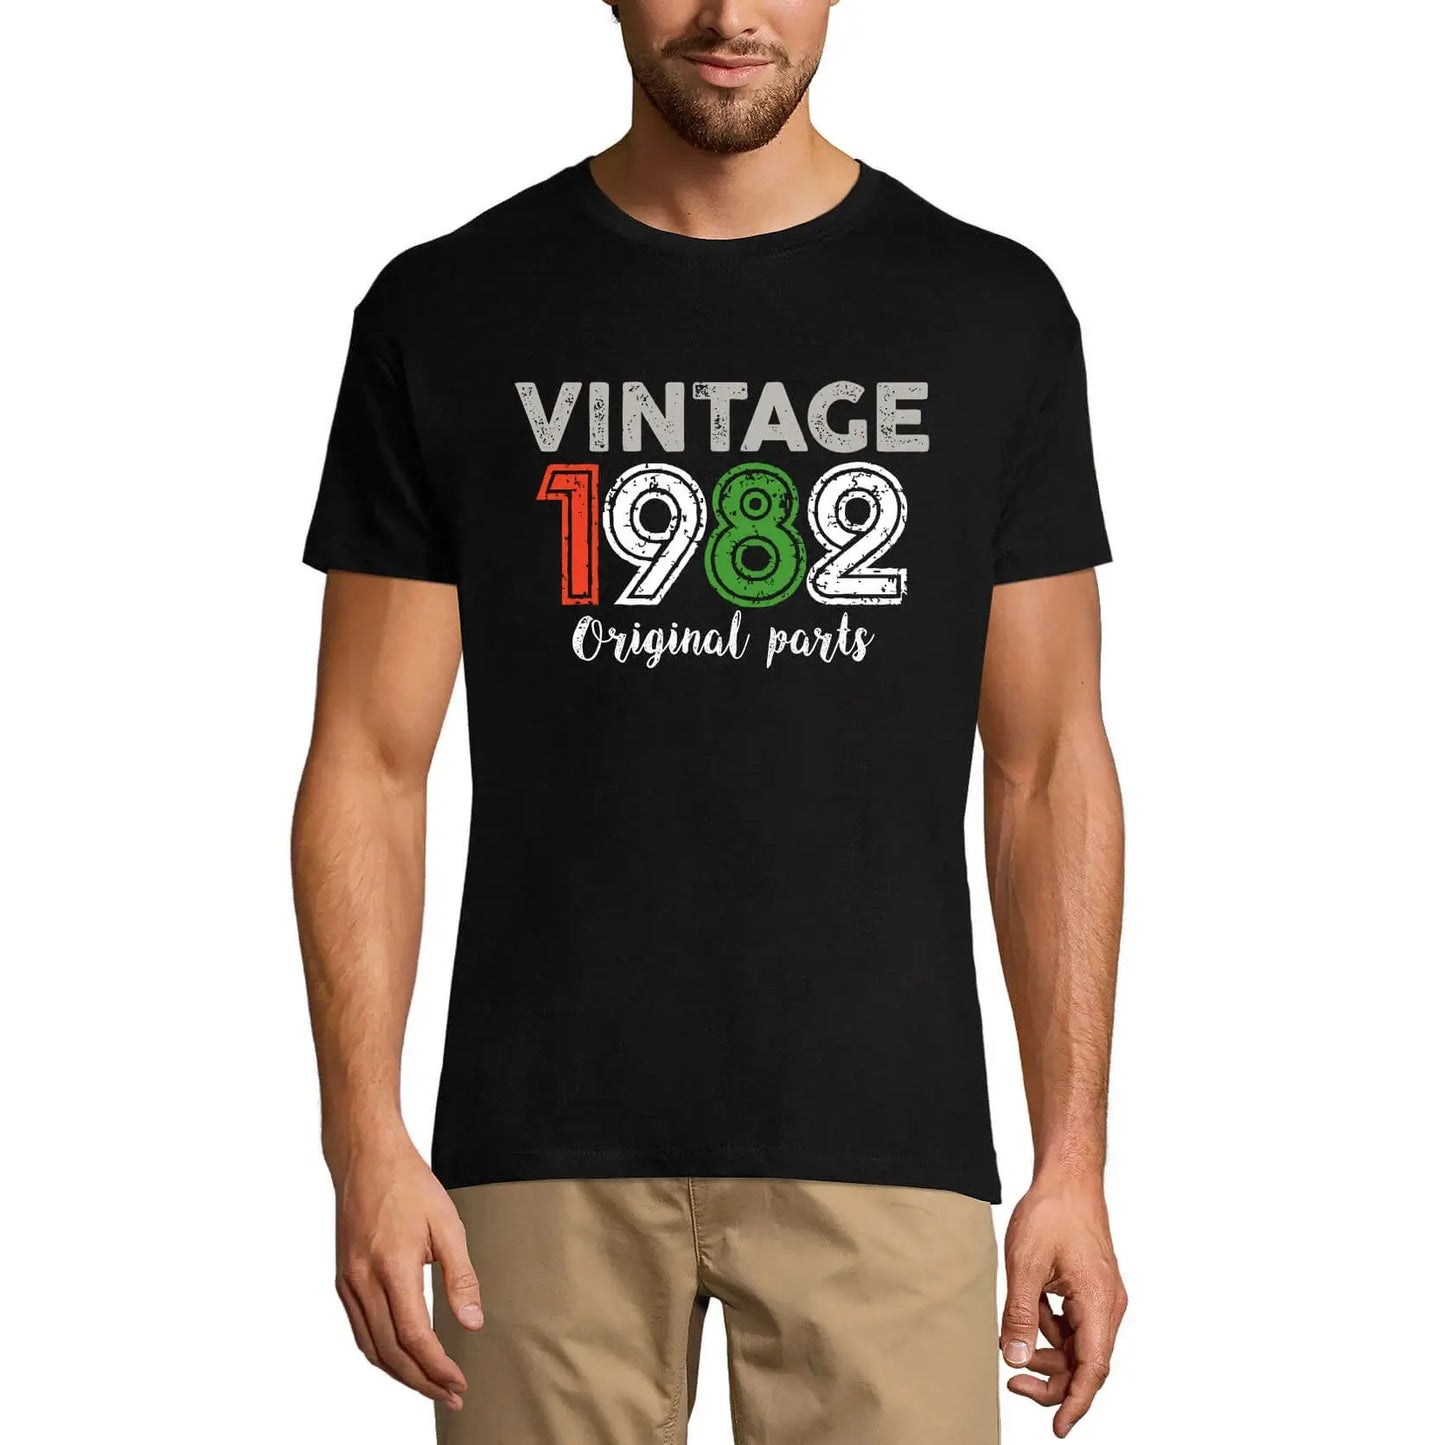 Men's Graphic T-Shirt Original Parts 1982 42nd Birthday Anniversary 42 Year Old Gift 1982 Vintage Eco-Friendly Short Sleeve Novelty Tee